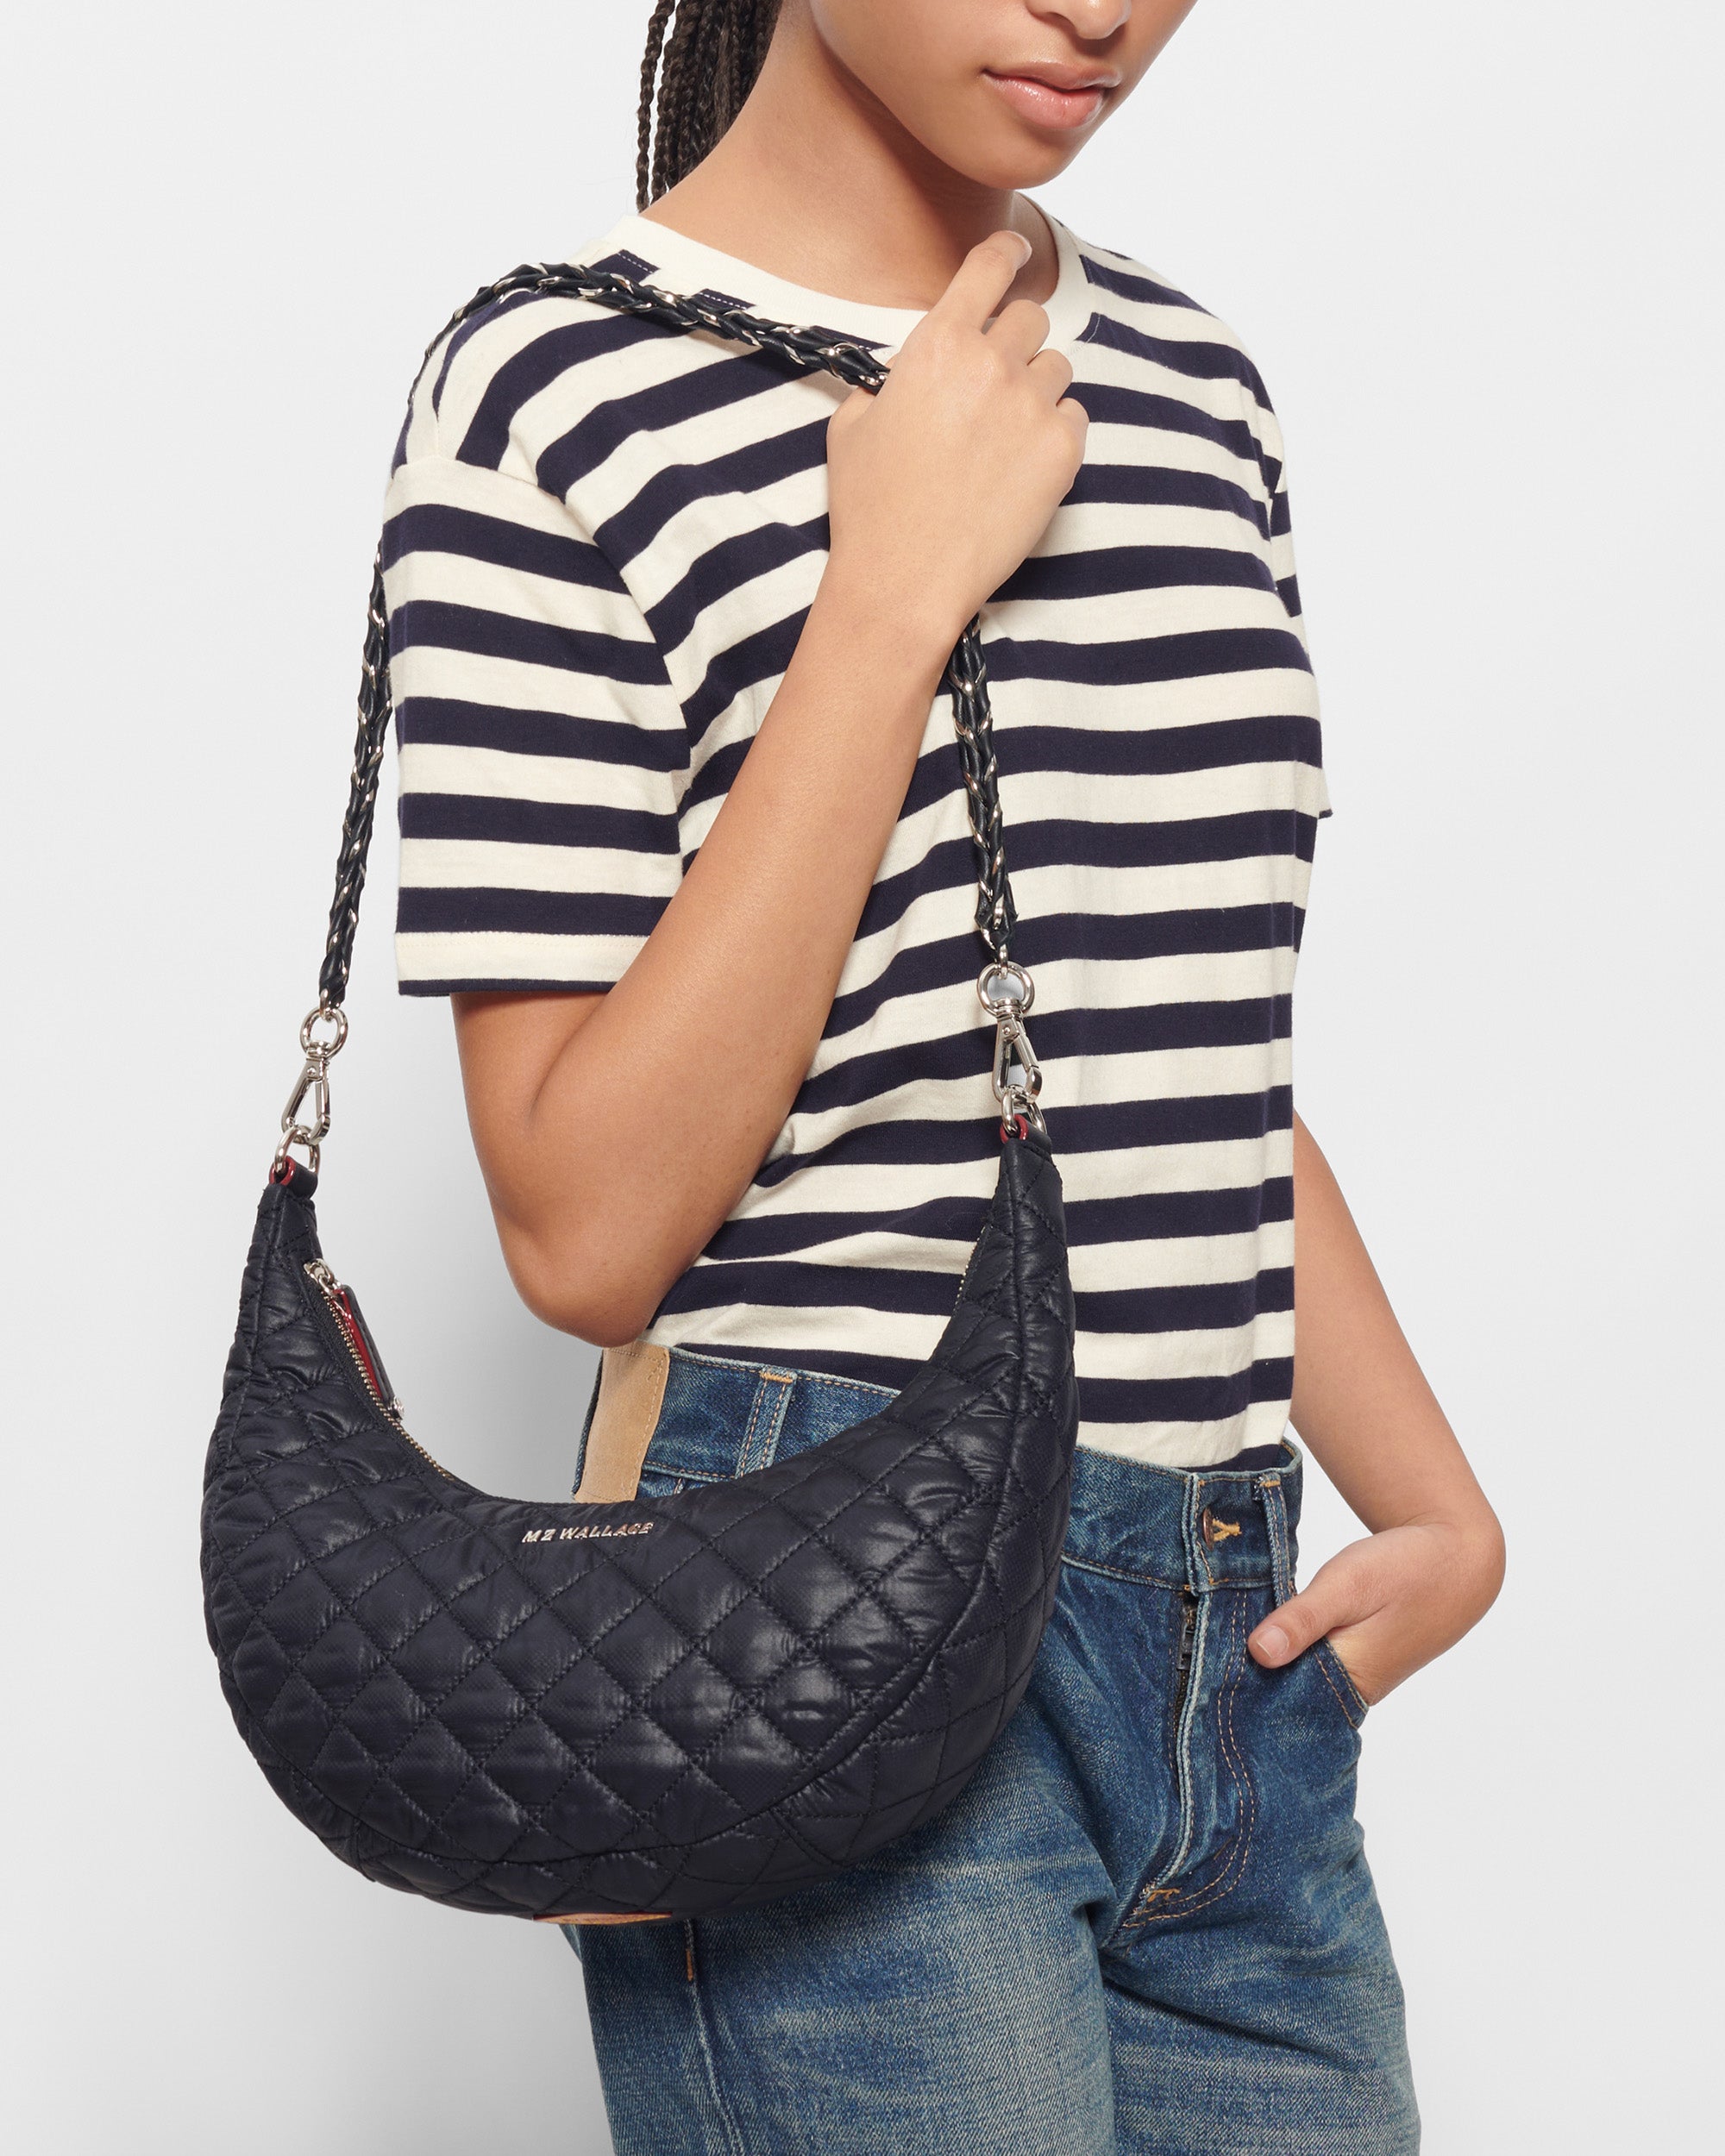 MZ Wallace Crosby Convertible Quilted Shoulder Bag